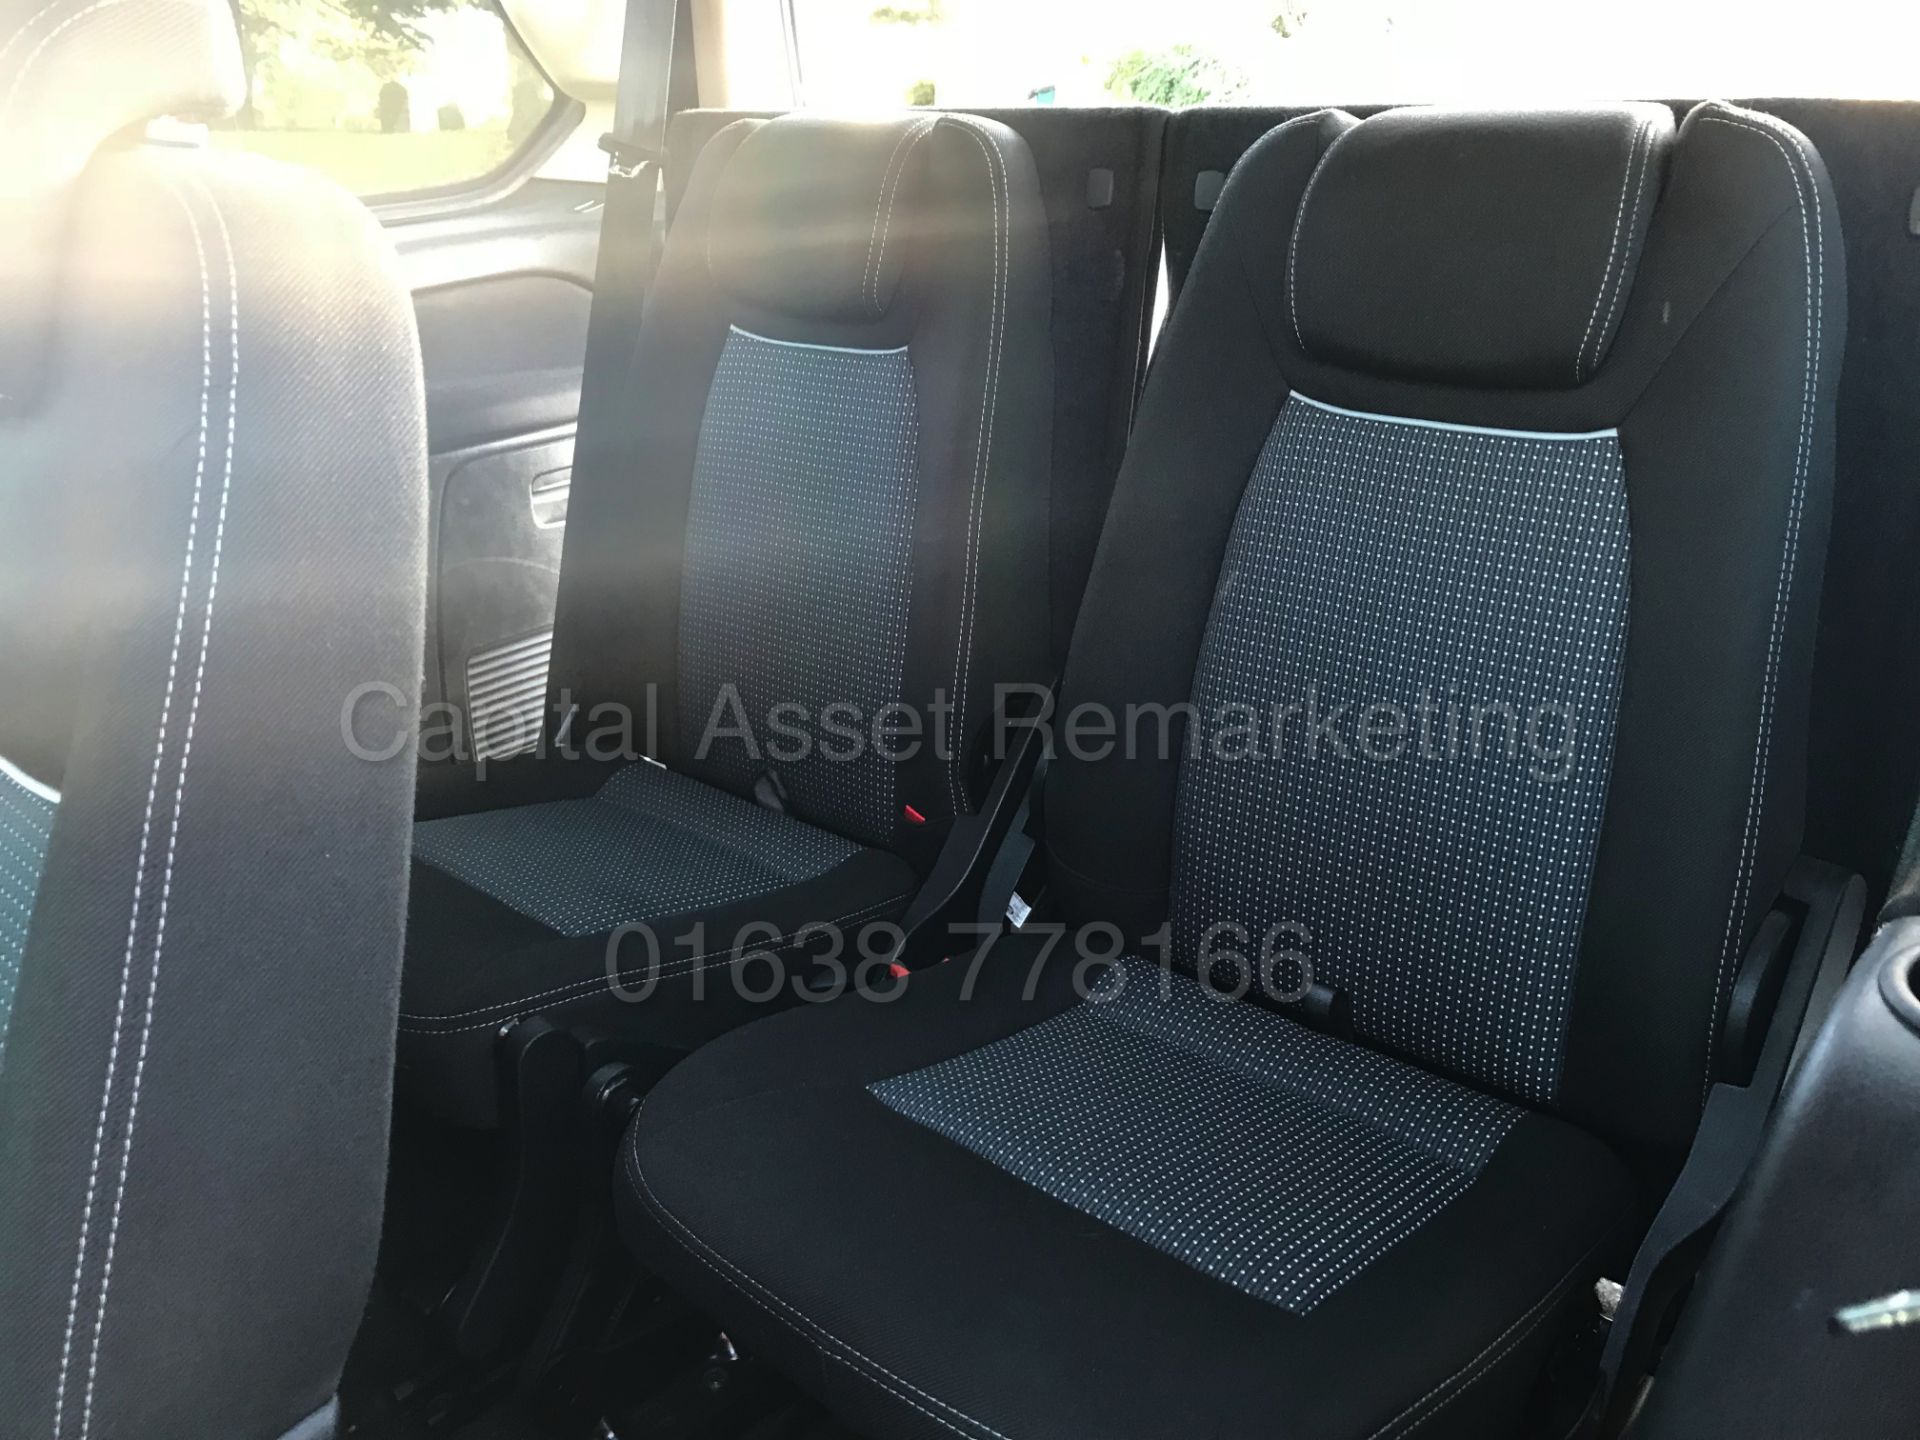 (On Sale) FORD GALAXY 'ZETEC' 7 SEATER MPV (2013) '2.0 TDCI -140 BHP' (1 OWNER) *FULL HISTORY* - Image 15 of 29